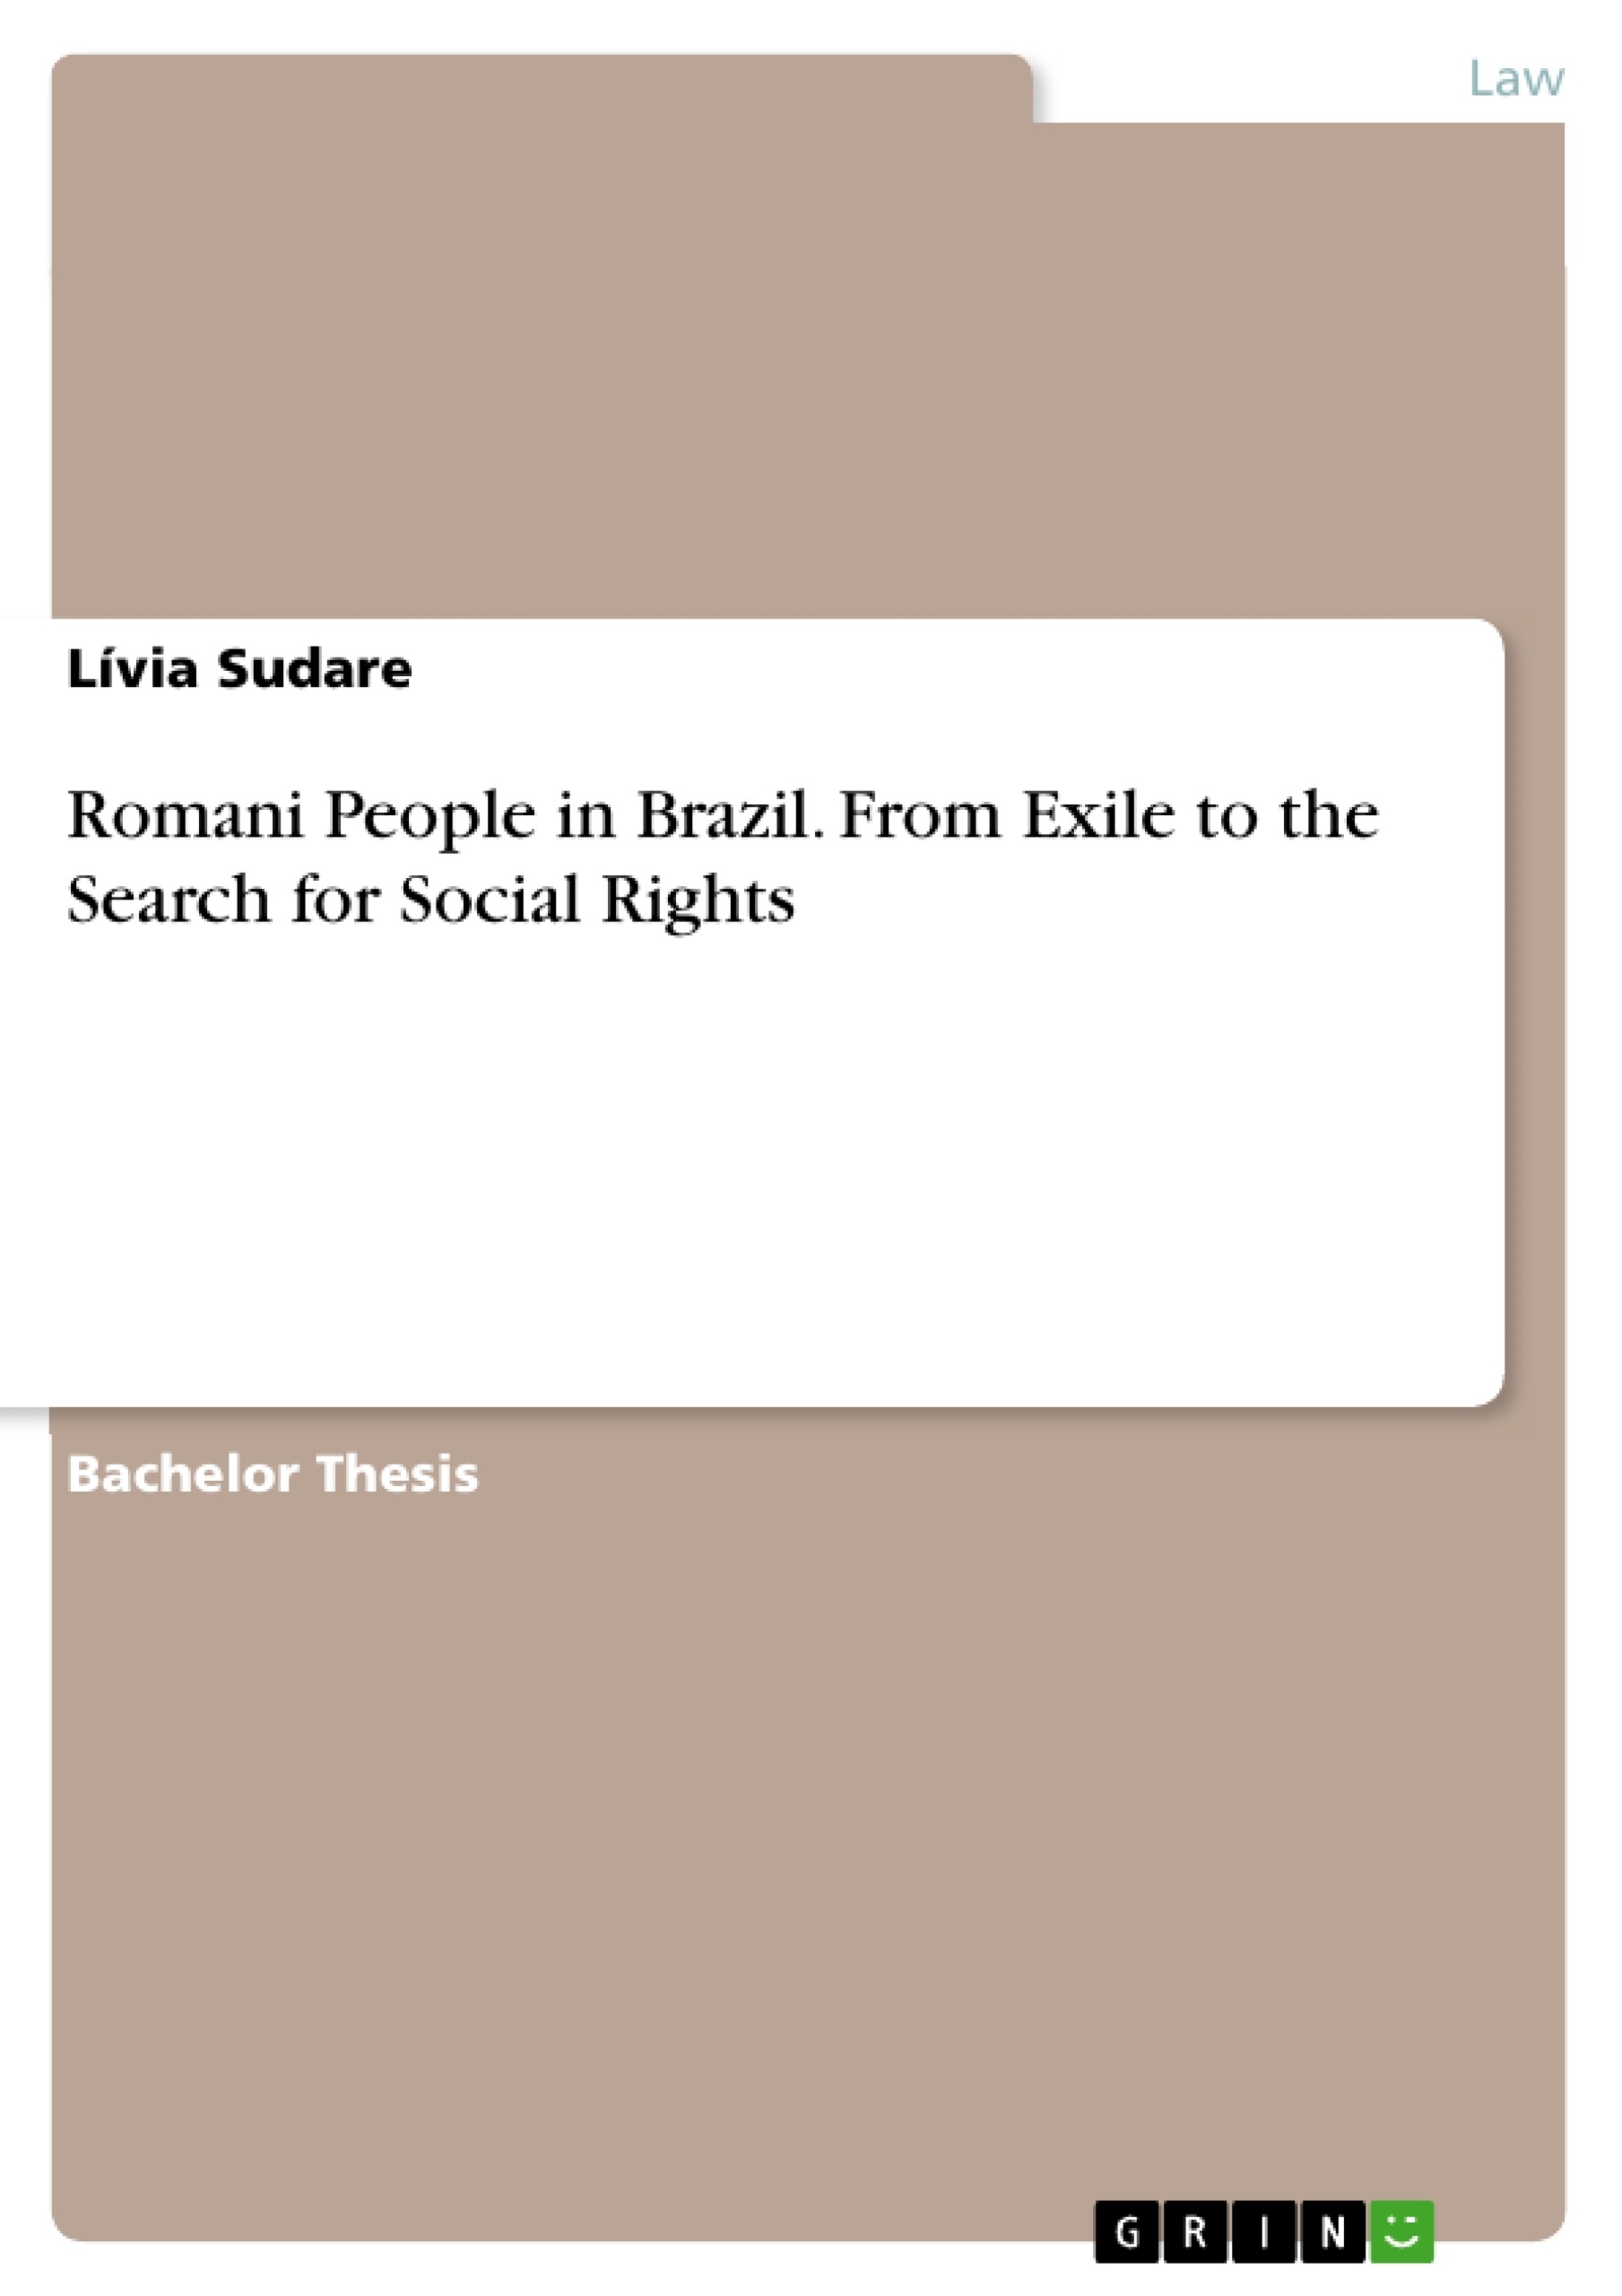 Title: Romani People in Brazil. From Exile to the Search for Social Rights